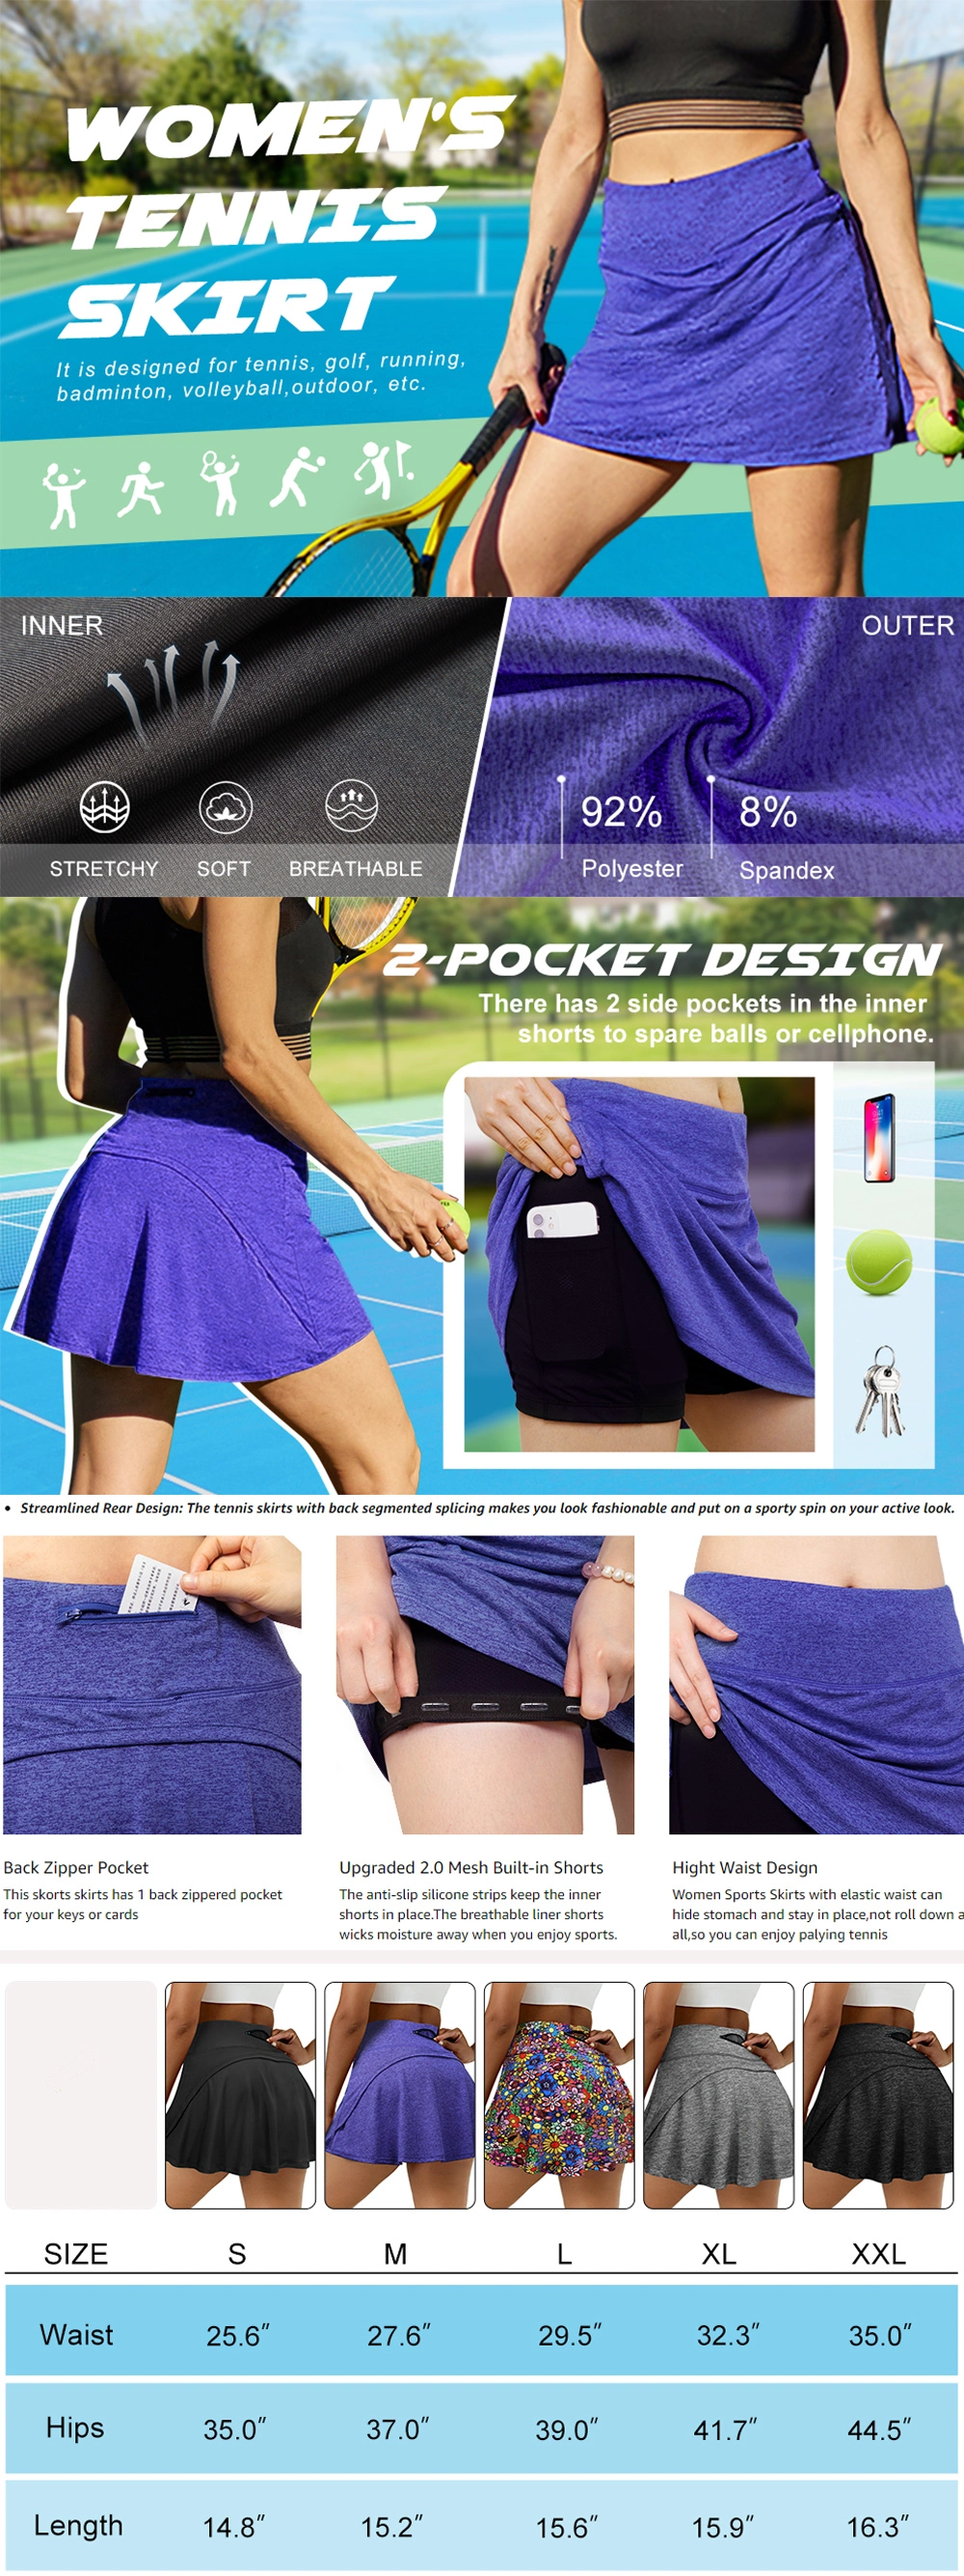 Tennis Skirts for Women with Pockets High Waisted Athletic Golf Skorts Skirts